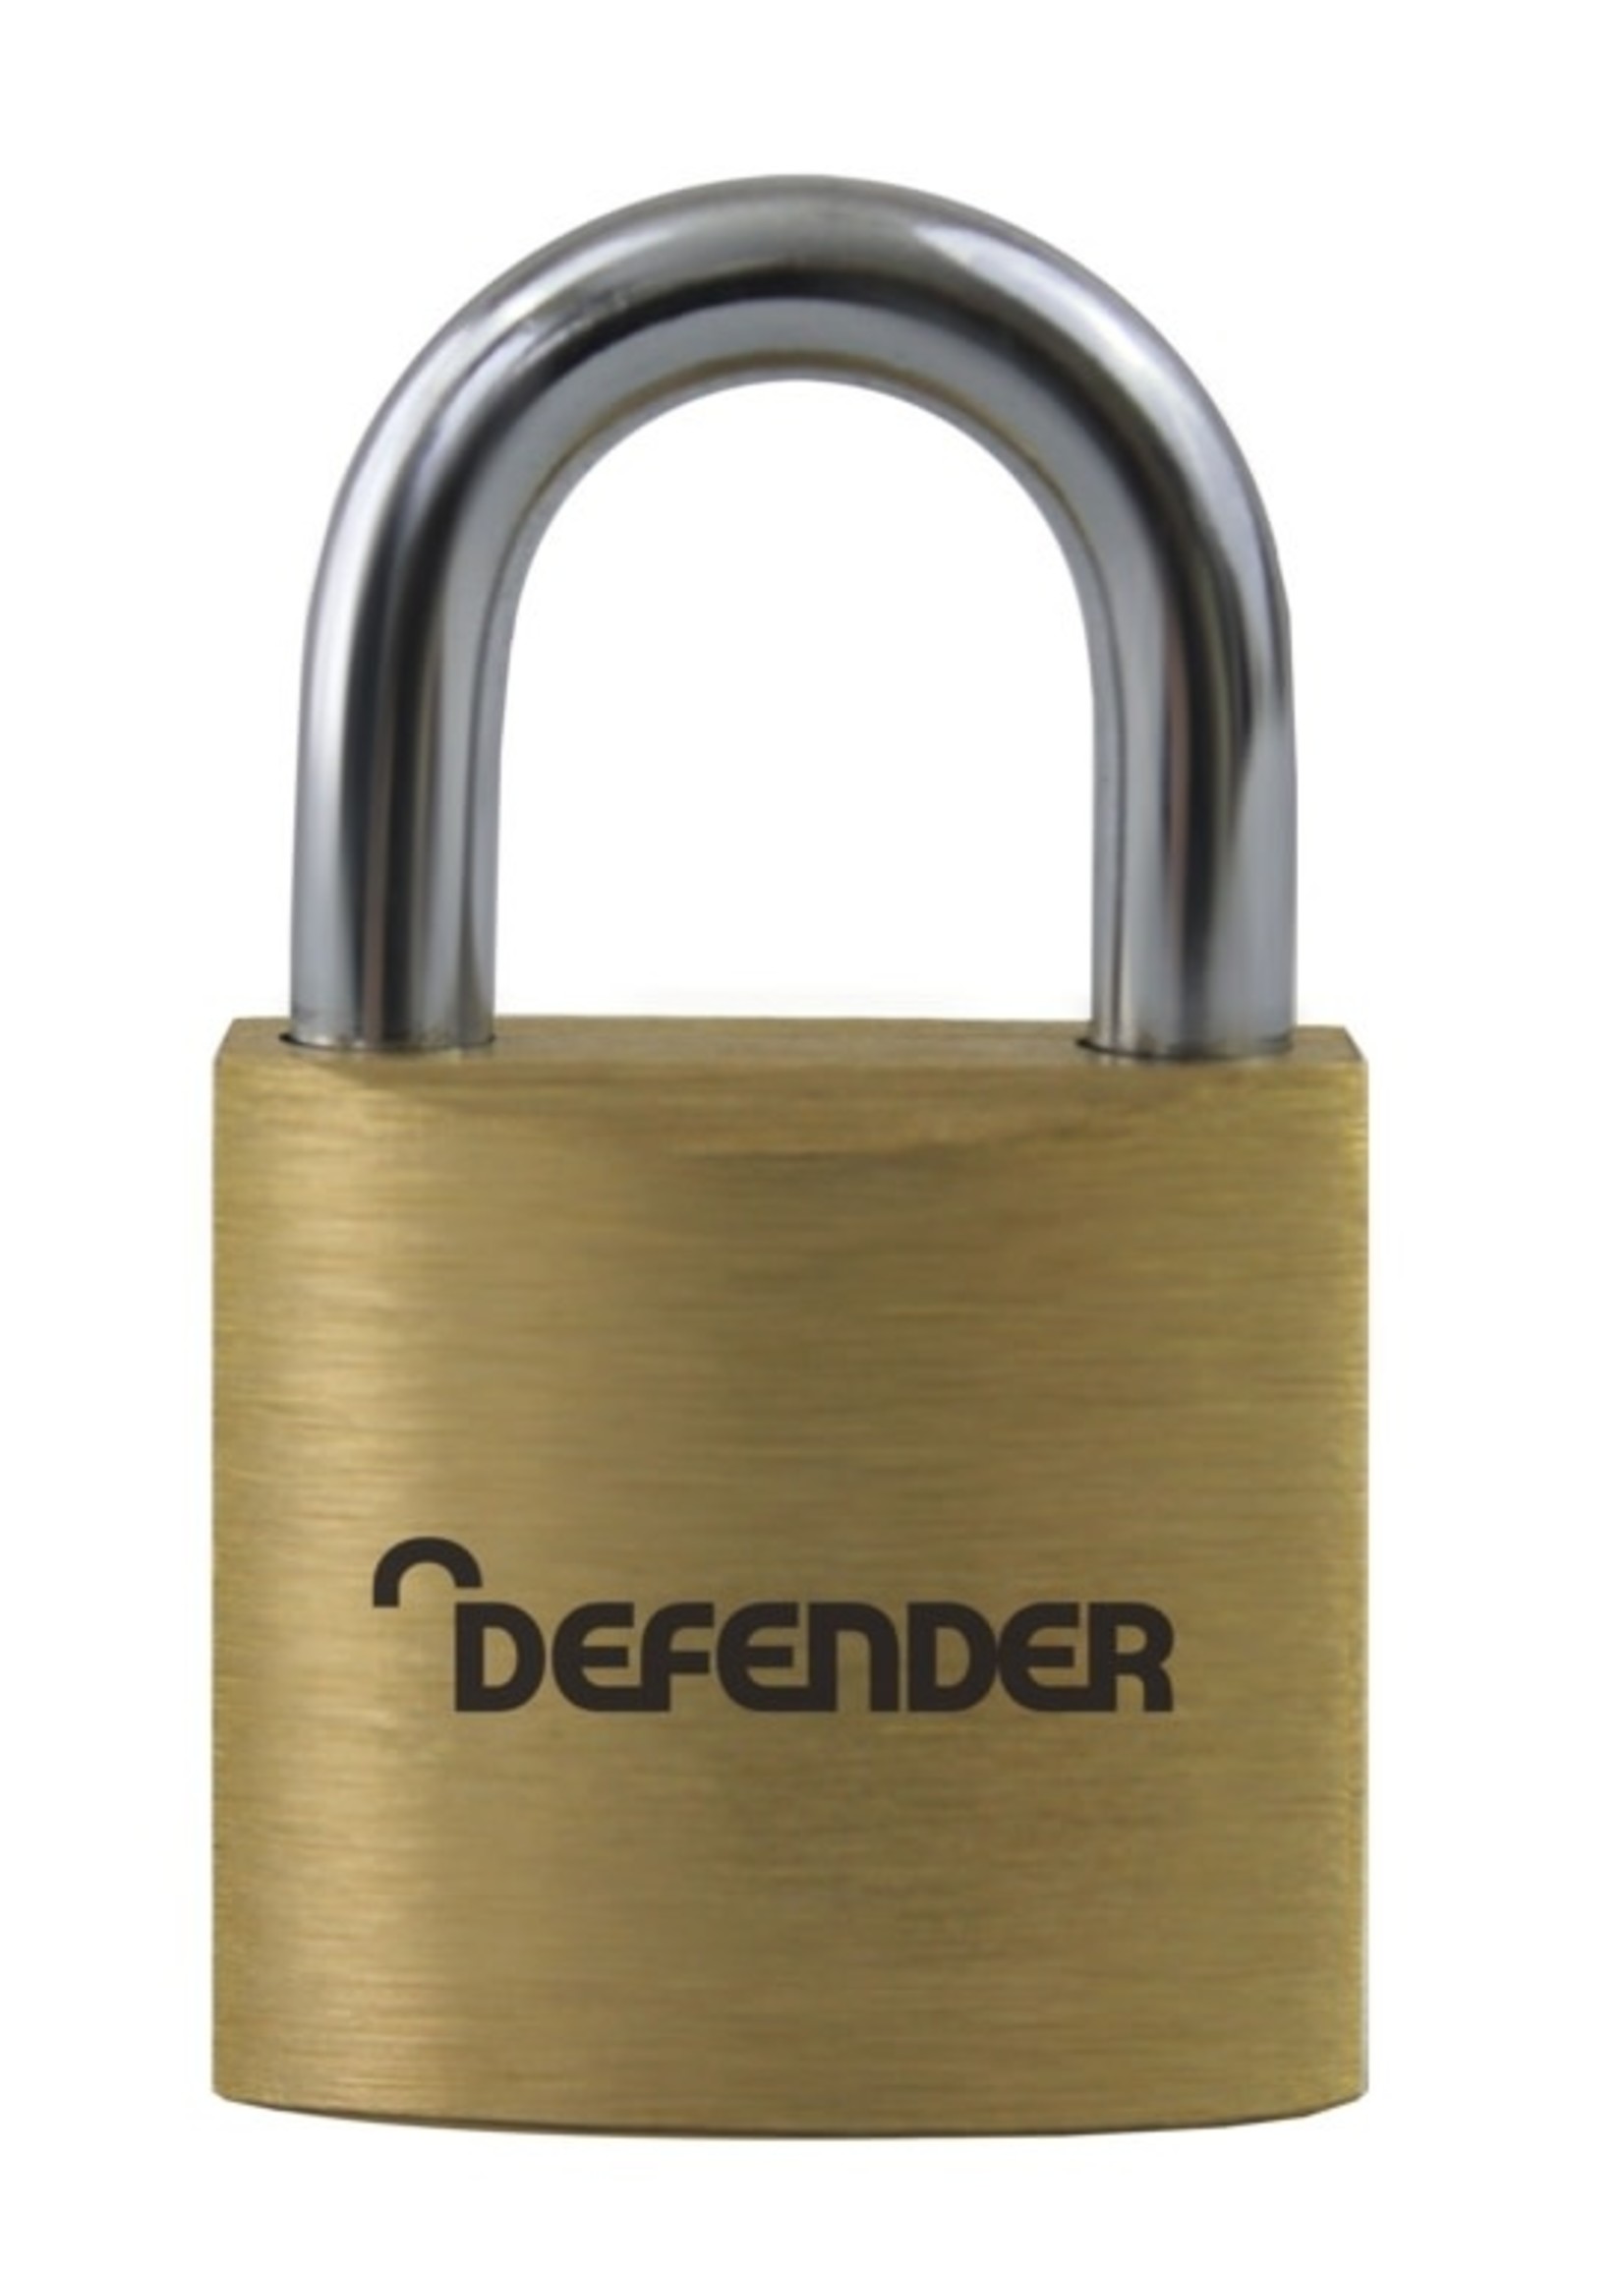 Squire Defender Brass Padlock 40mm Twin Pack